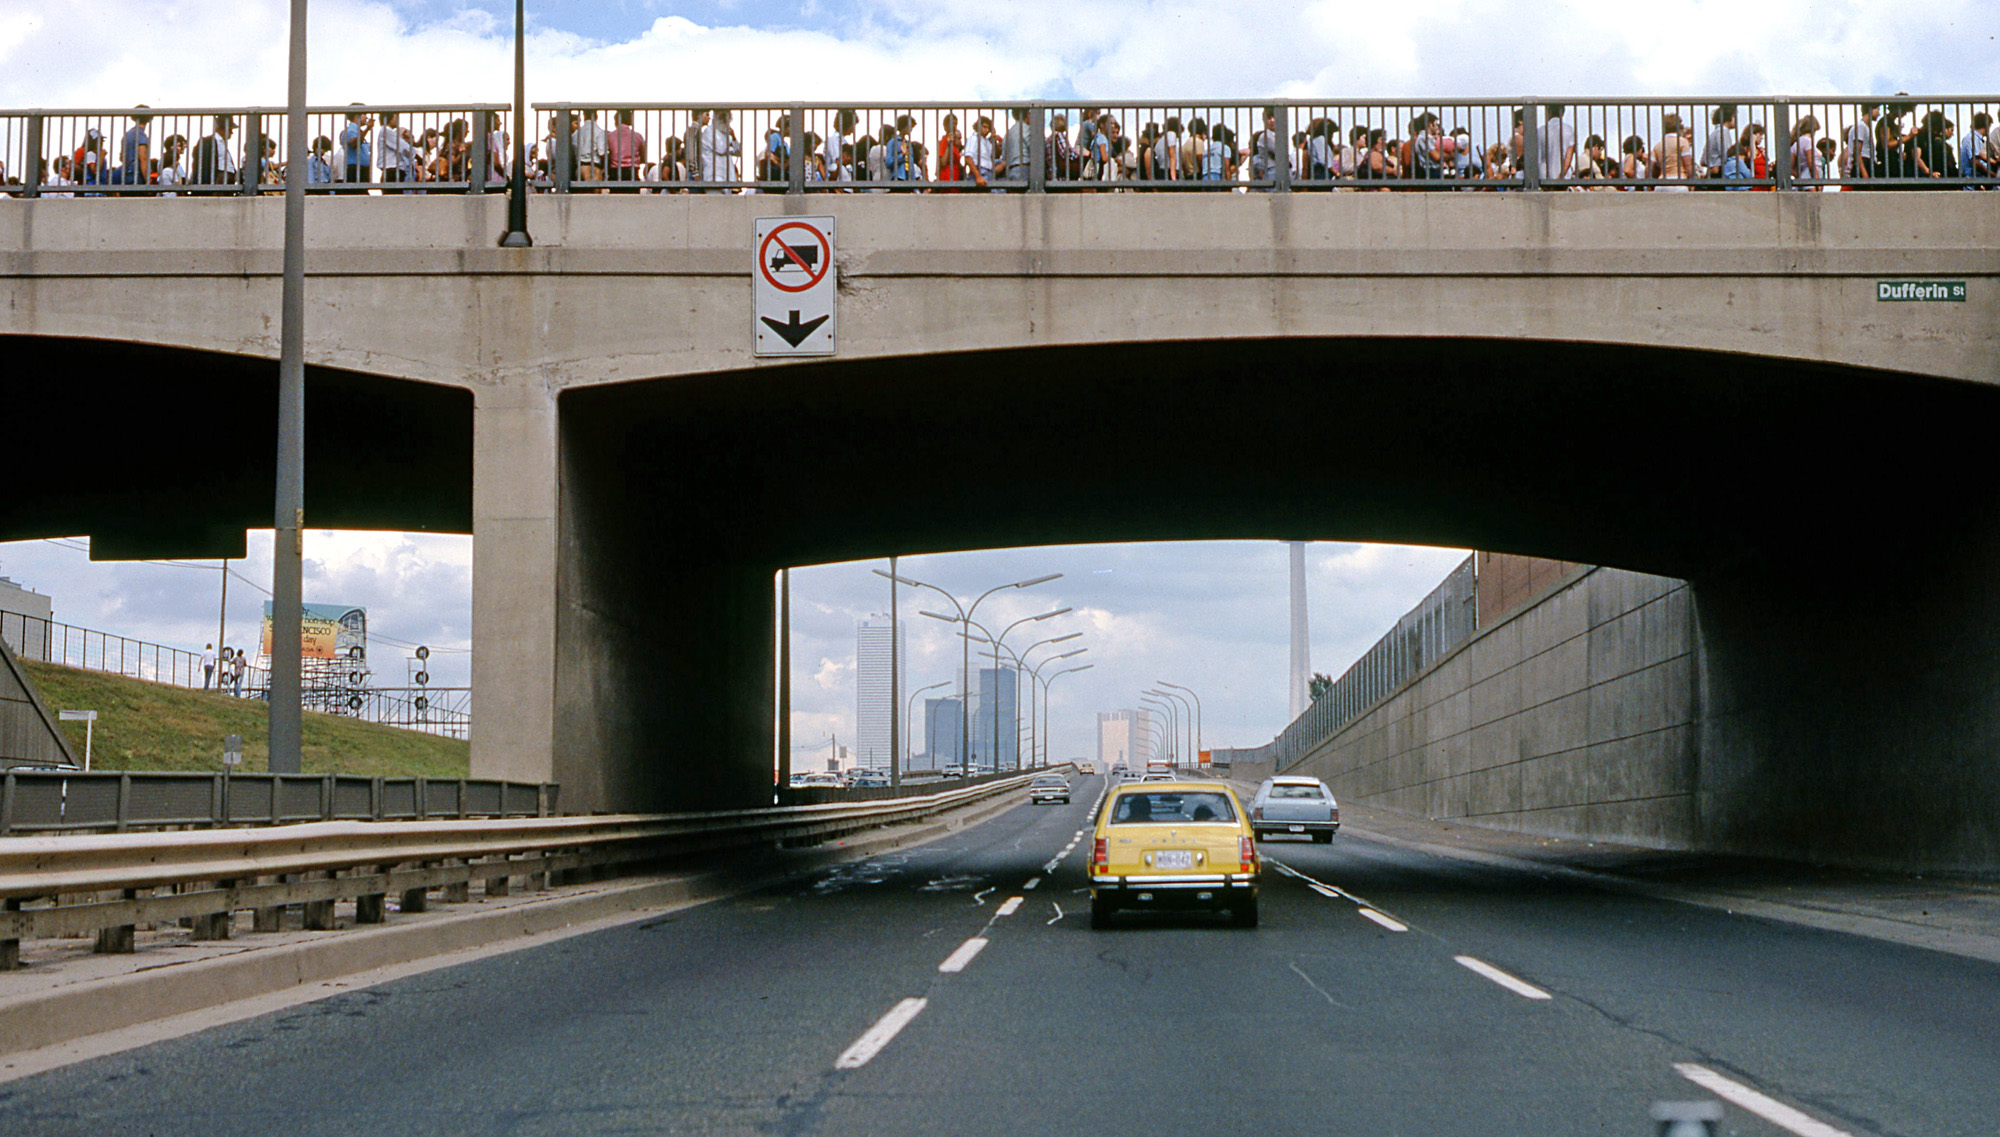 This is the second of three submissions of a 1979 Labour Day trip to Toronto on the QEW, documented from the driver's seat. Here I'm approaching an overpass with a line-up of people. They're waiting to enter the CNE (Canadian National Exhibition) by way of the Dufferin St. Gate. The CNE has been held for well over a hundred years on the waterfront of Toronto, and attracts hundreds of thousands annually at summer's end for two weeks. Downtown Toronto and the CN Tower can be seen in the distance. View full size.